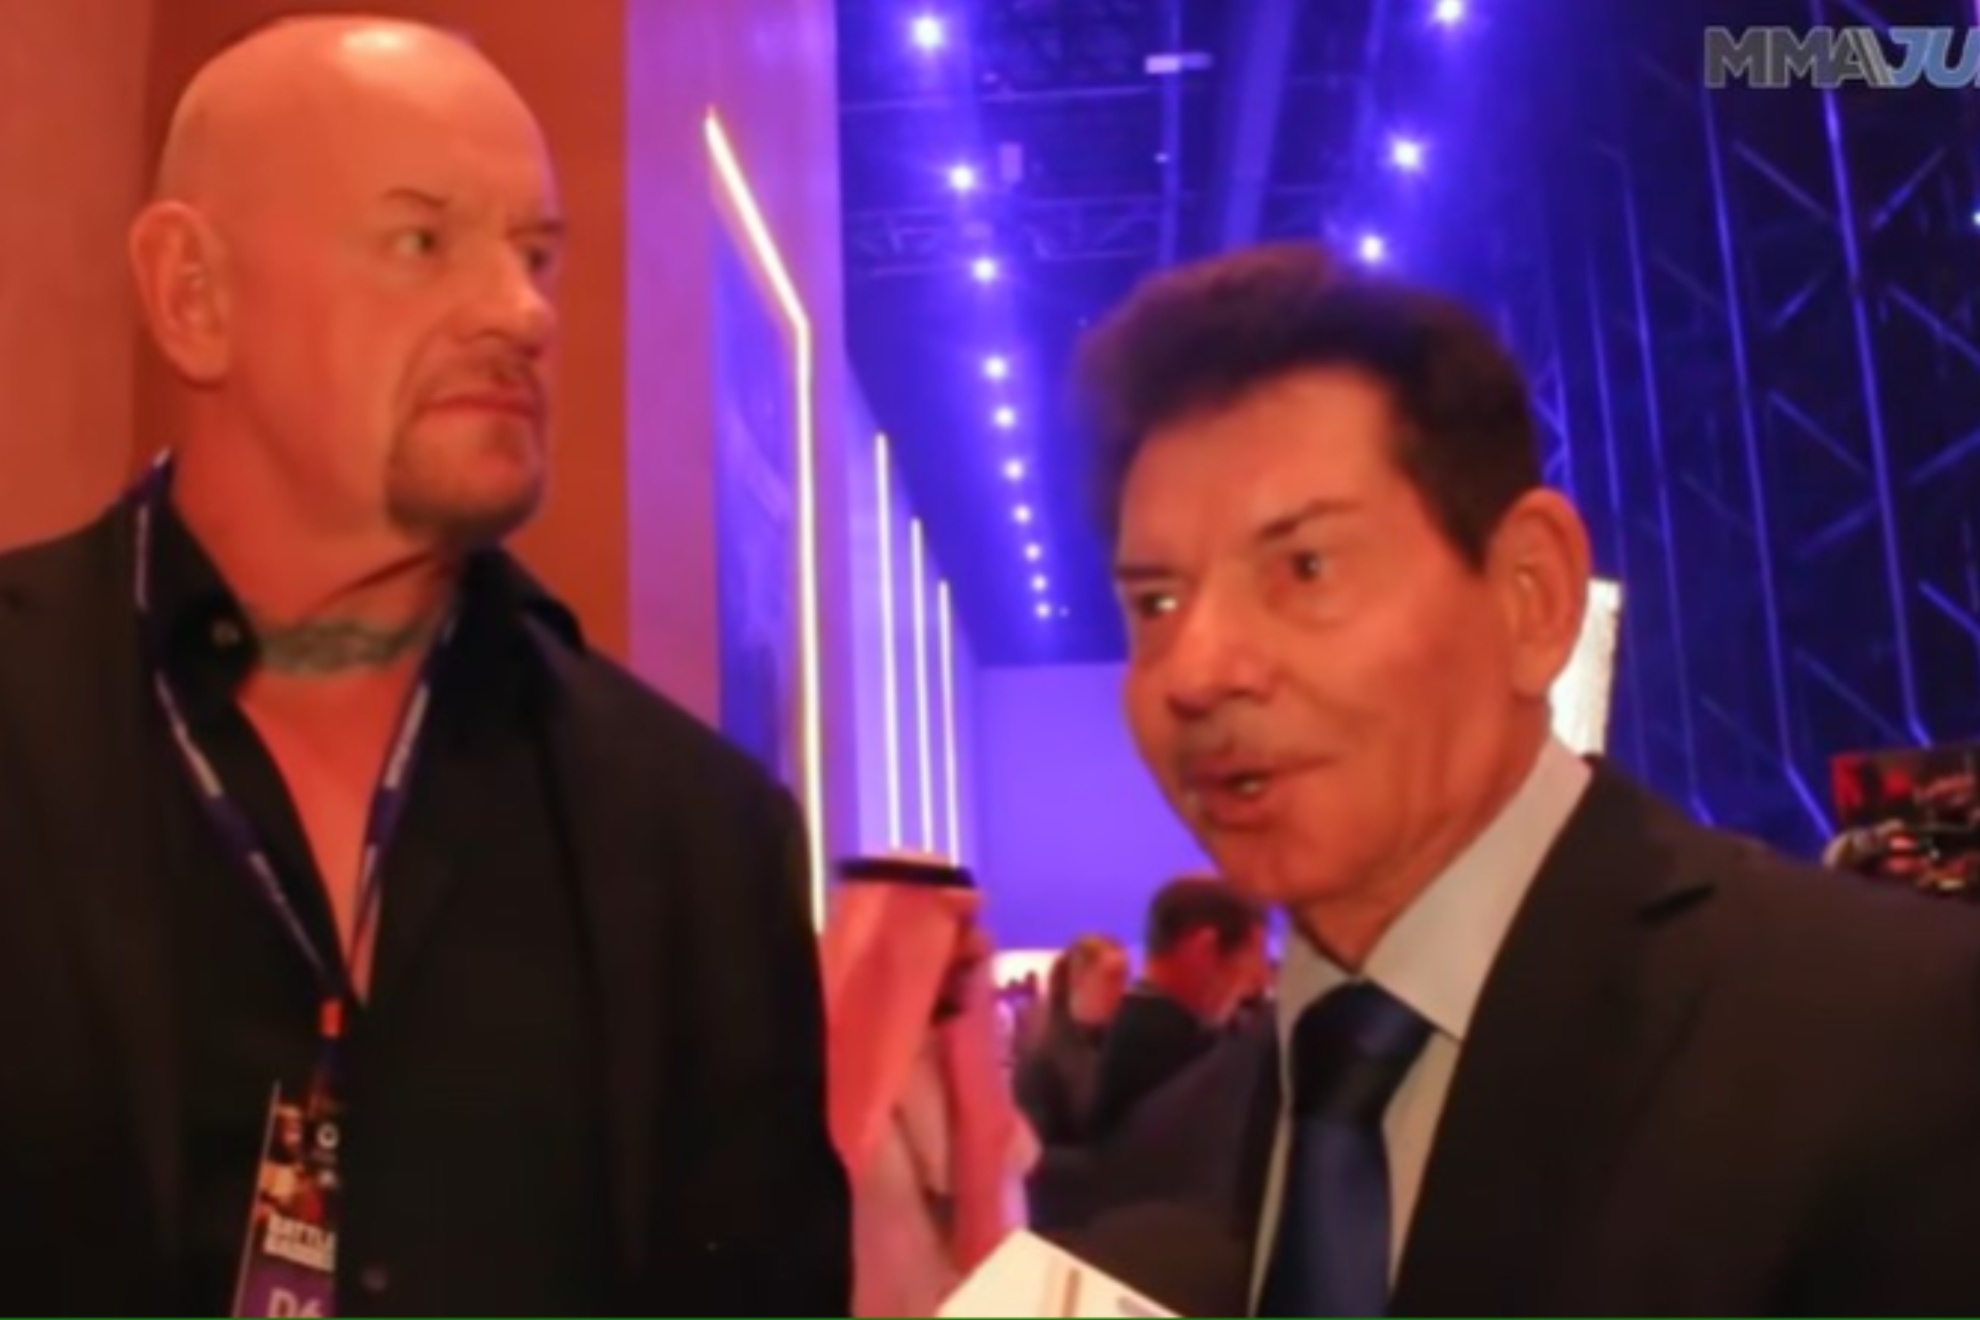 Vince McMahon arrived to the Tyson Fury vs Francis Ngannou fight in Saudi Arabia with the Undertaker